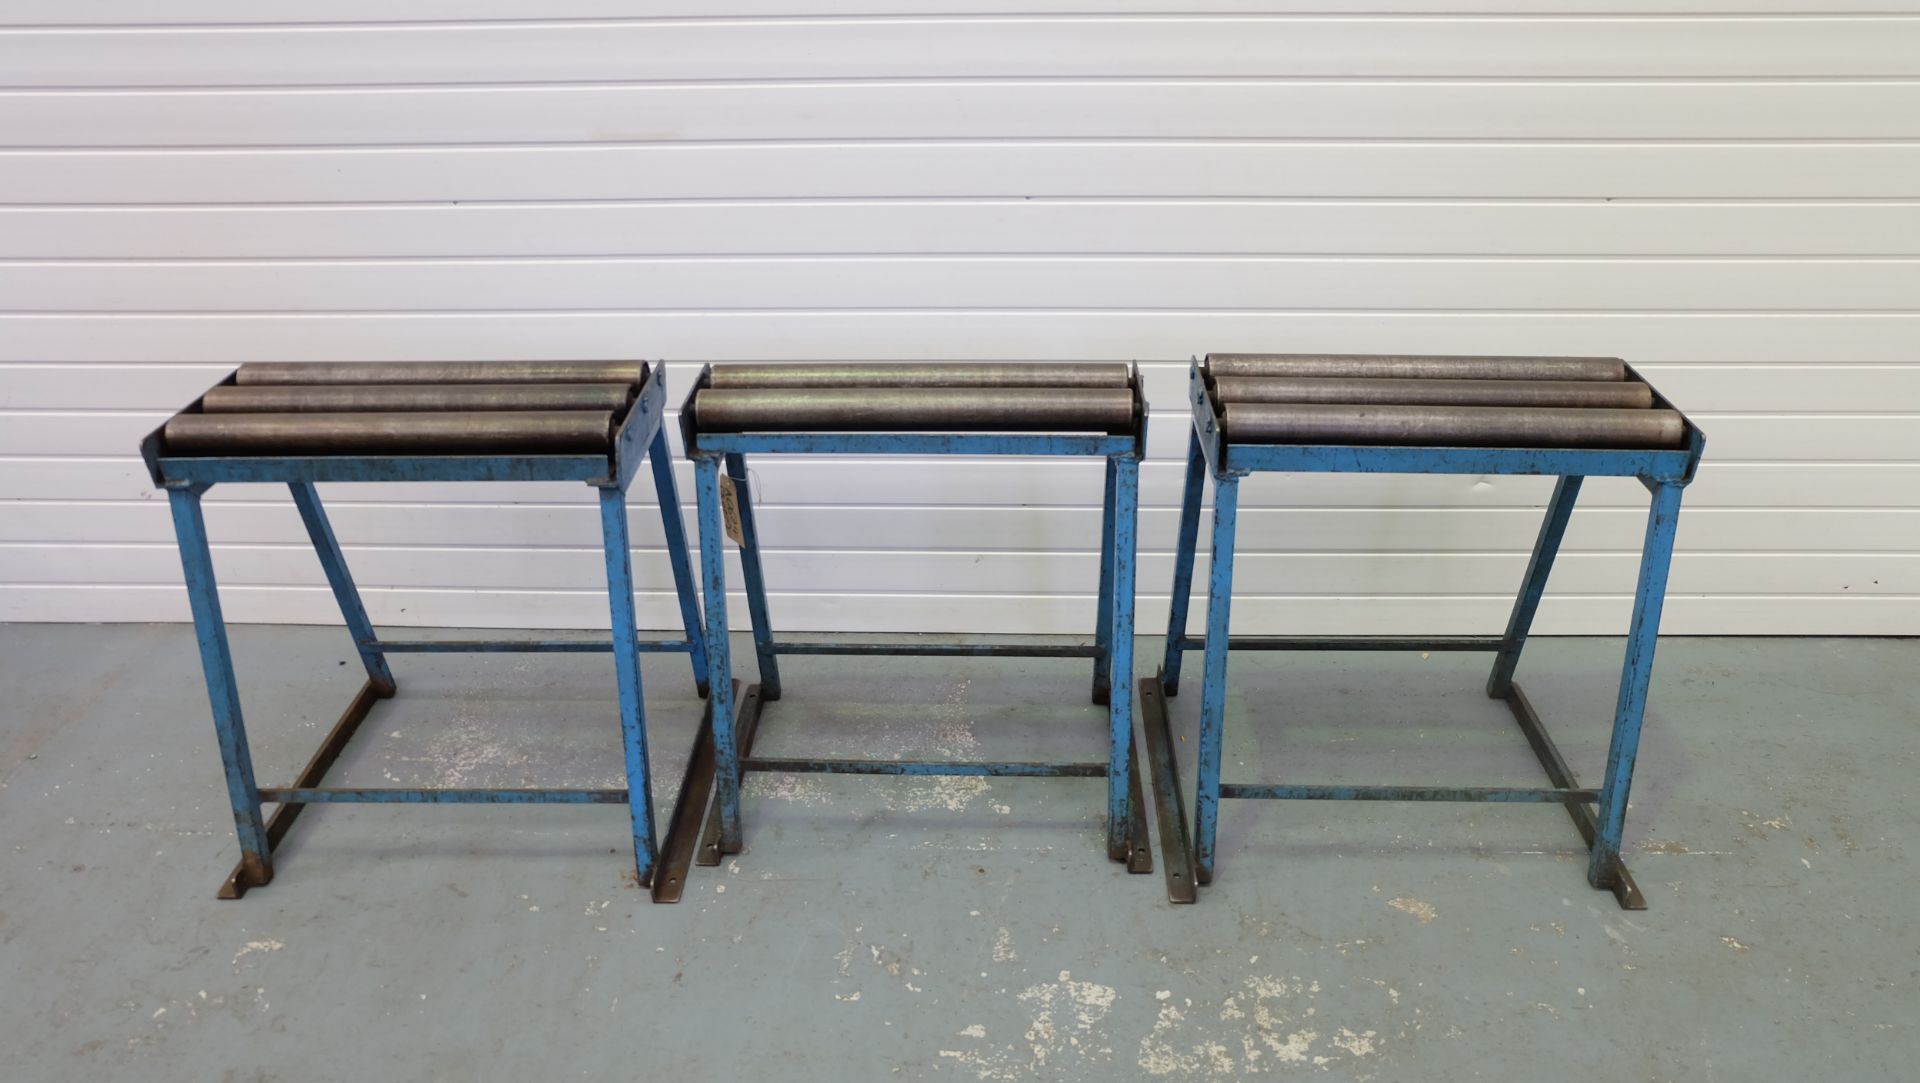 Three Roller Stands. Width of Rollers: 24". Height of Rollers: 28 3/4".